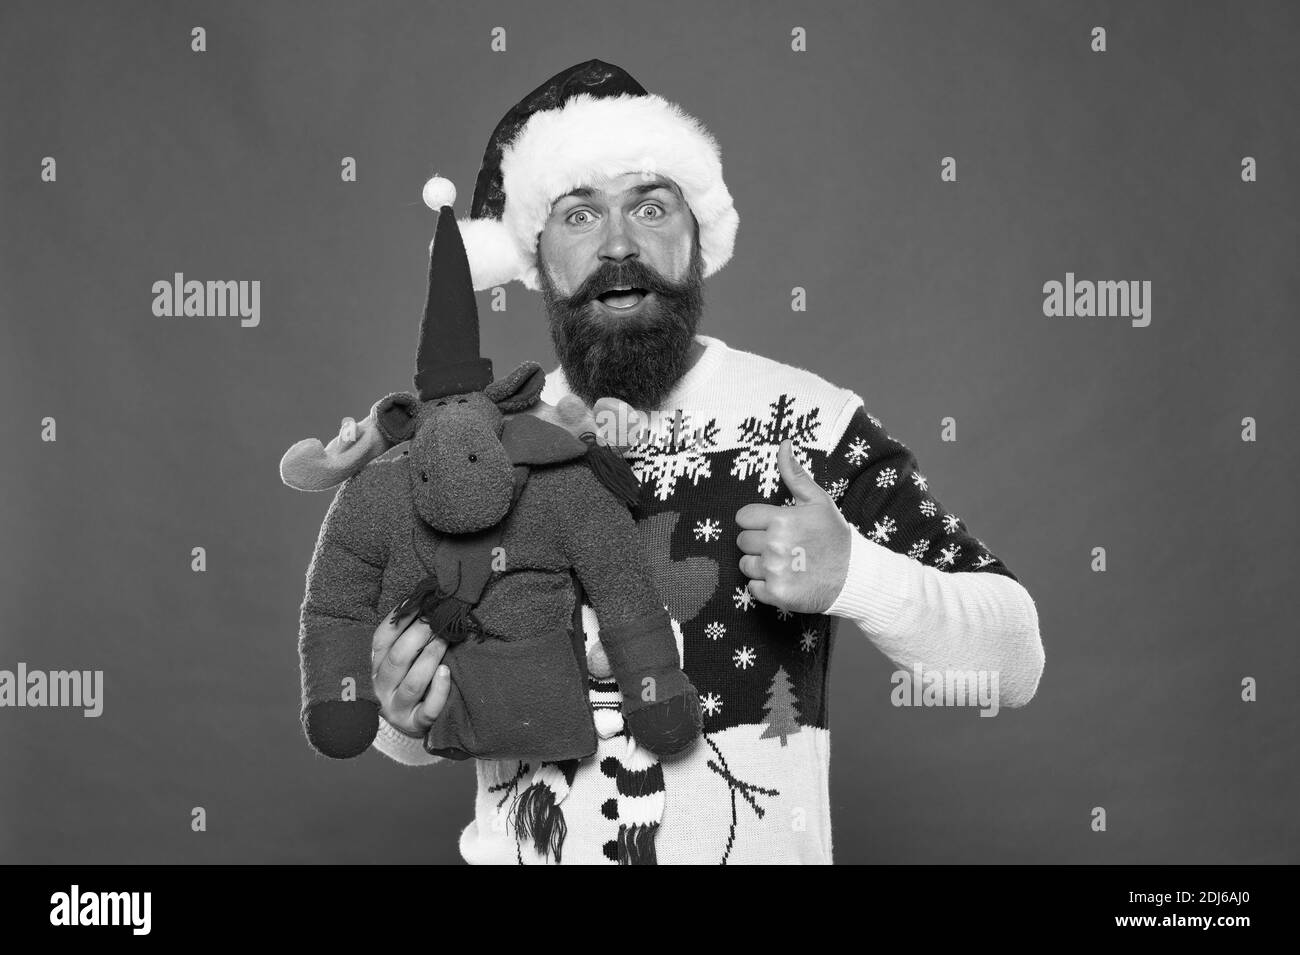 Santas favorite deer. Happy hipster give like with reindeer toy. Bearded man show thumbs up like hand. Like from Santa. Celebrate Christmas and New year. Like if you believe in Santa Claus. Stock Photo